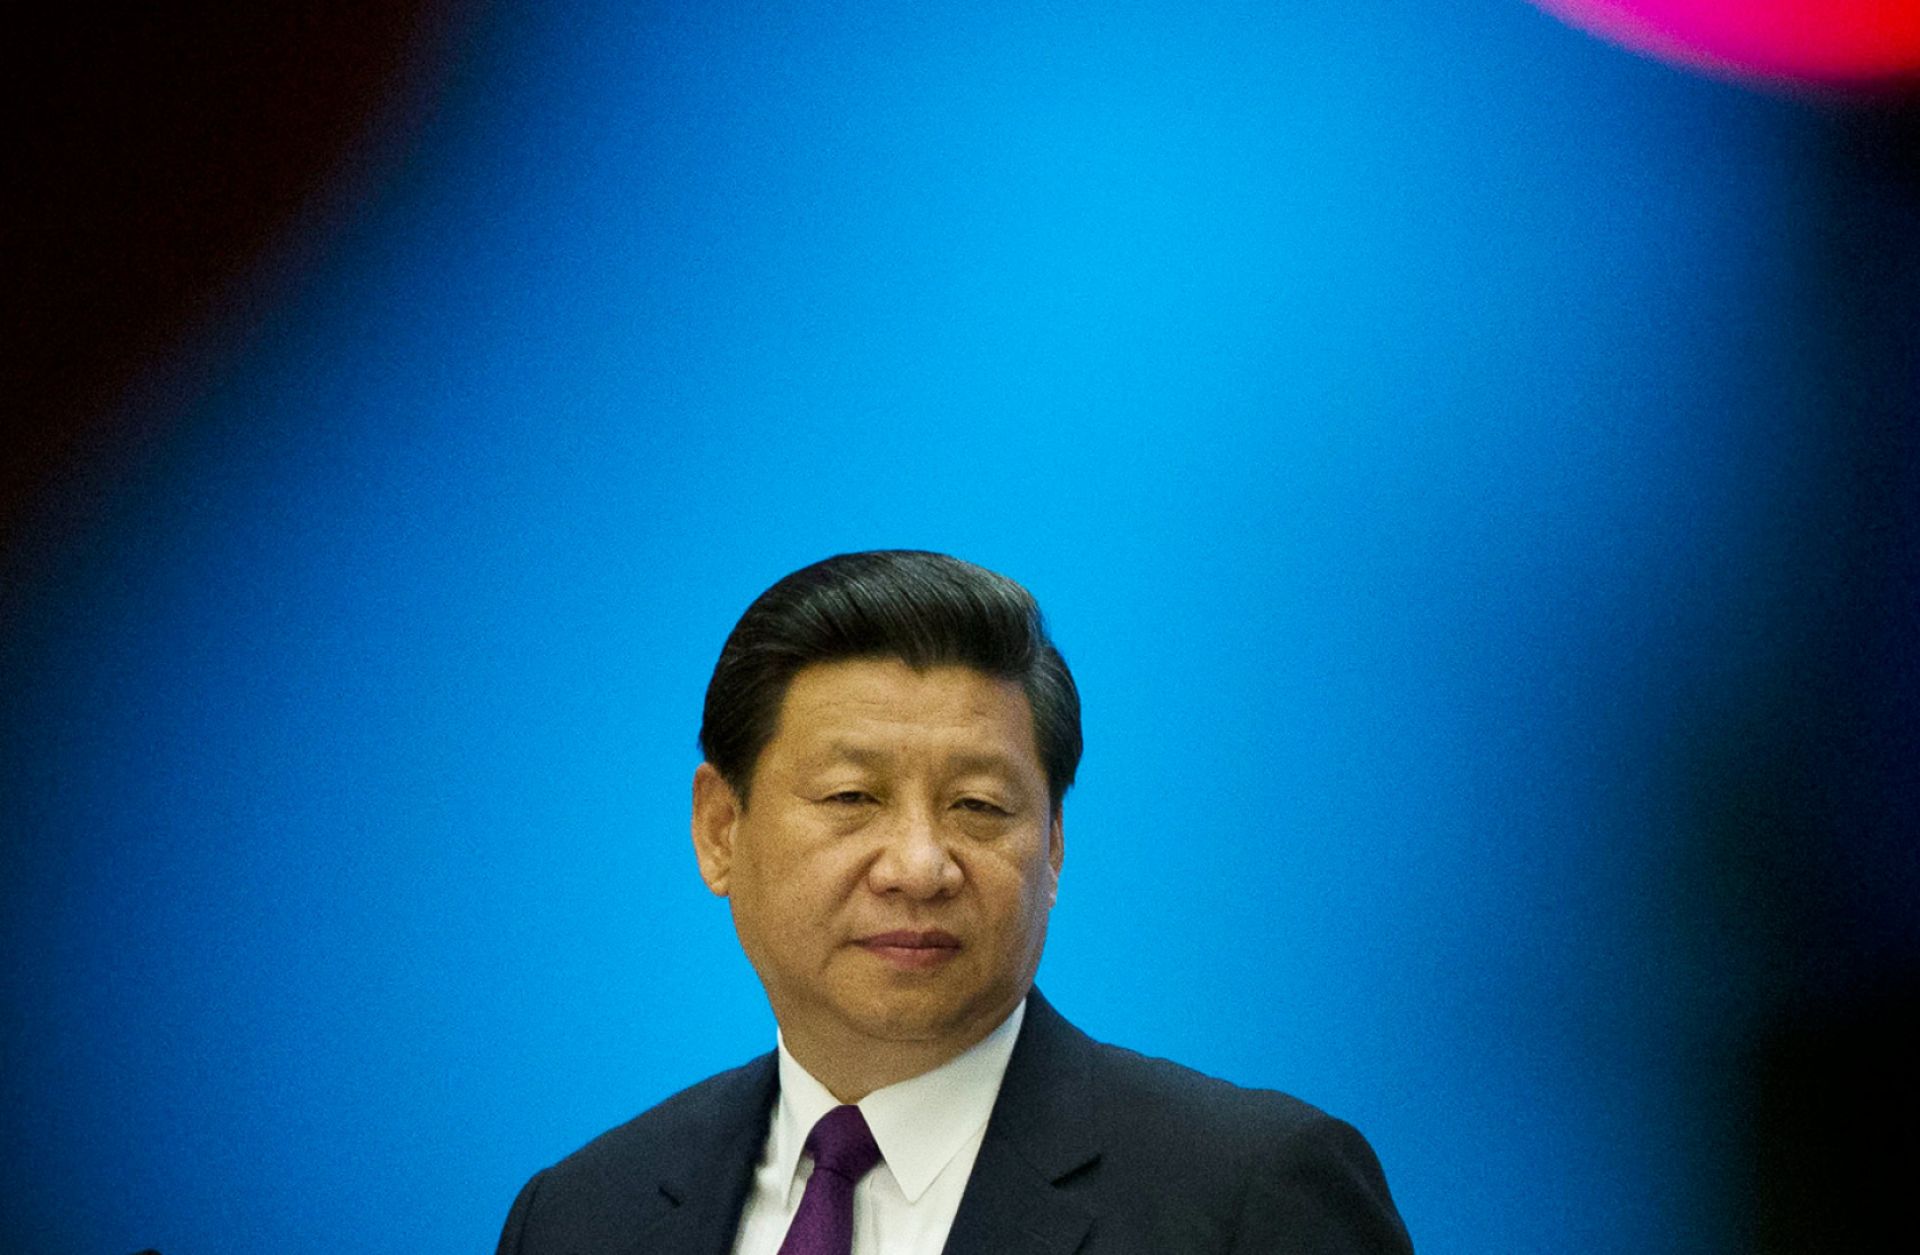 Chinese President Xi Jinping's harsh clampdown on any form of protest suggests that authorities are concerned about dissent building in the country.